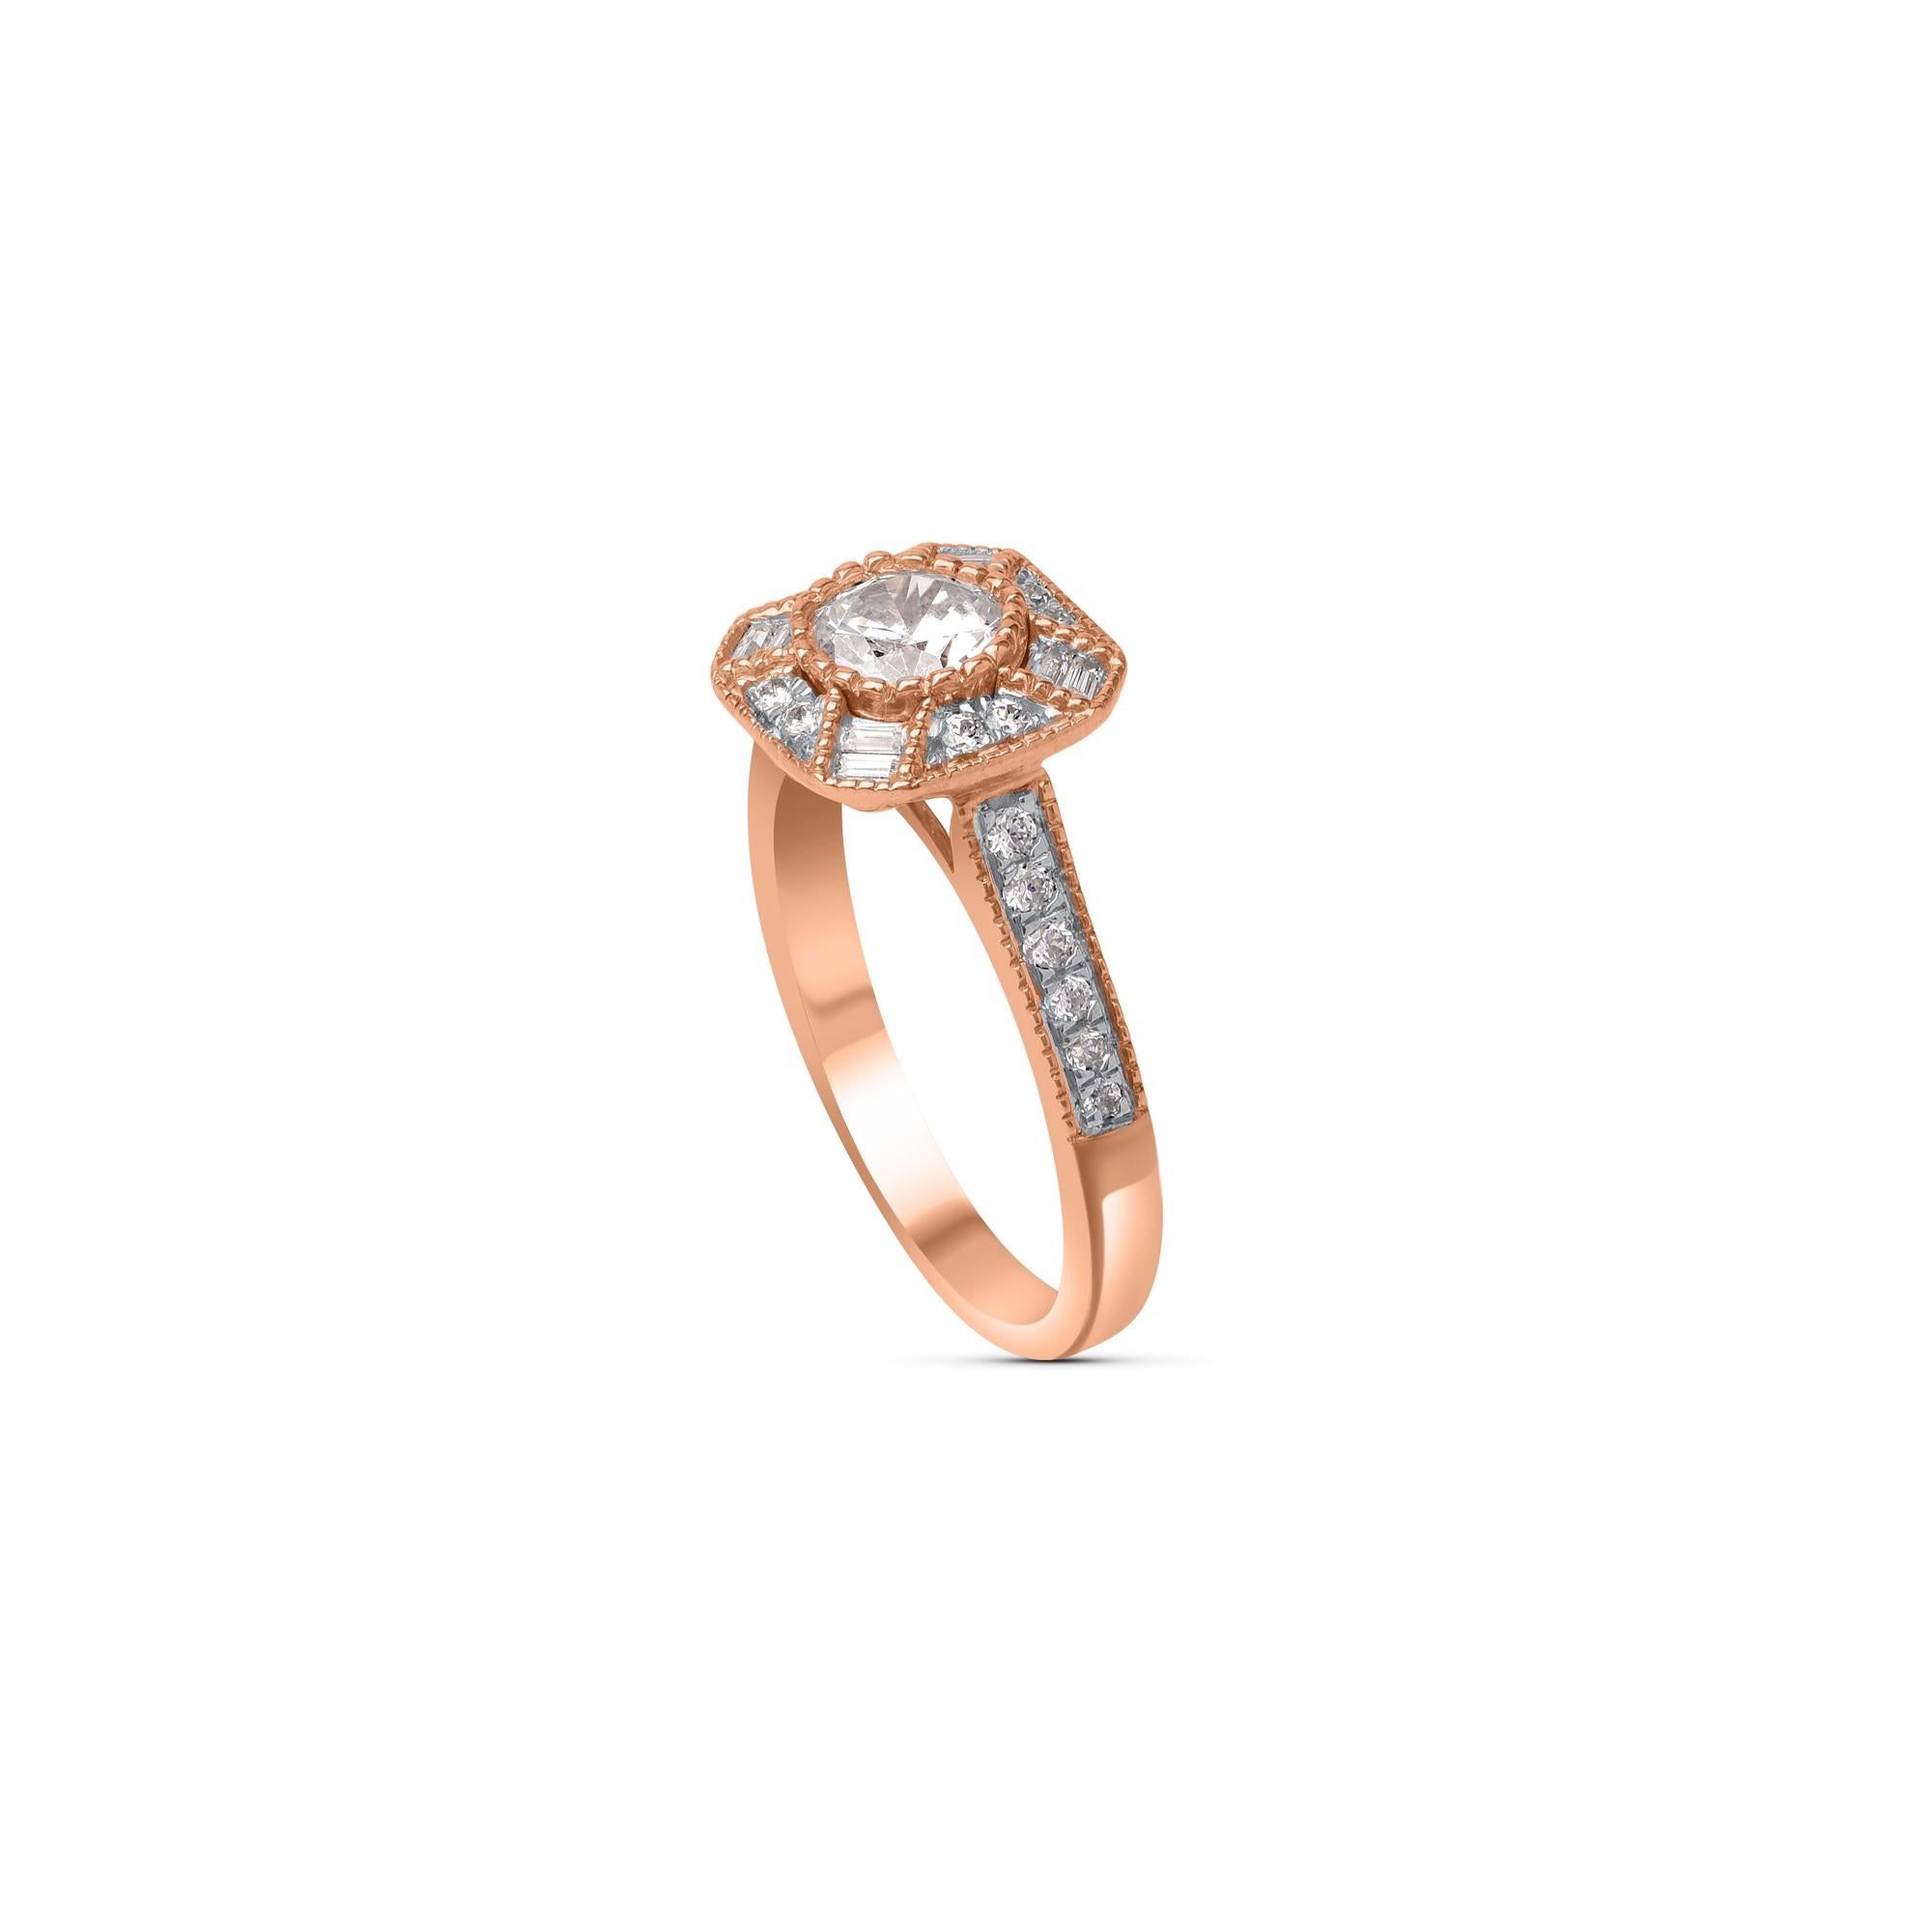 This diamond engagement ring dazzles with 21 brilliant-cut and 6 baguette-cut diamonds set elegantly in bezel, pave and channel setting and fashioned in 18 kt rose gold. Diamonds are graded H-I Color, I1 Clarity. 

Metal color and ring size can be